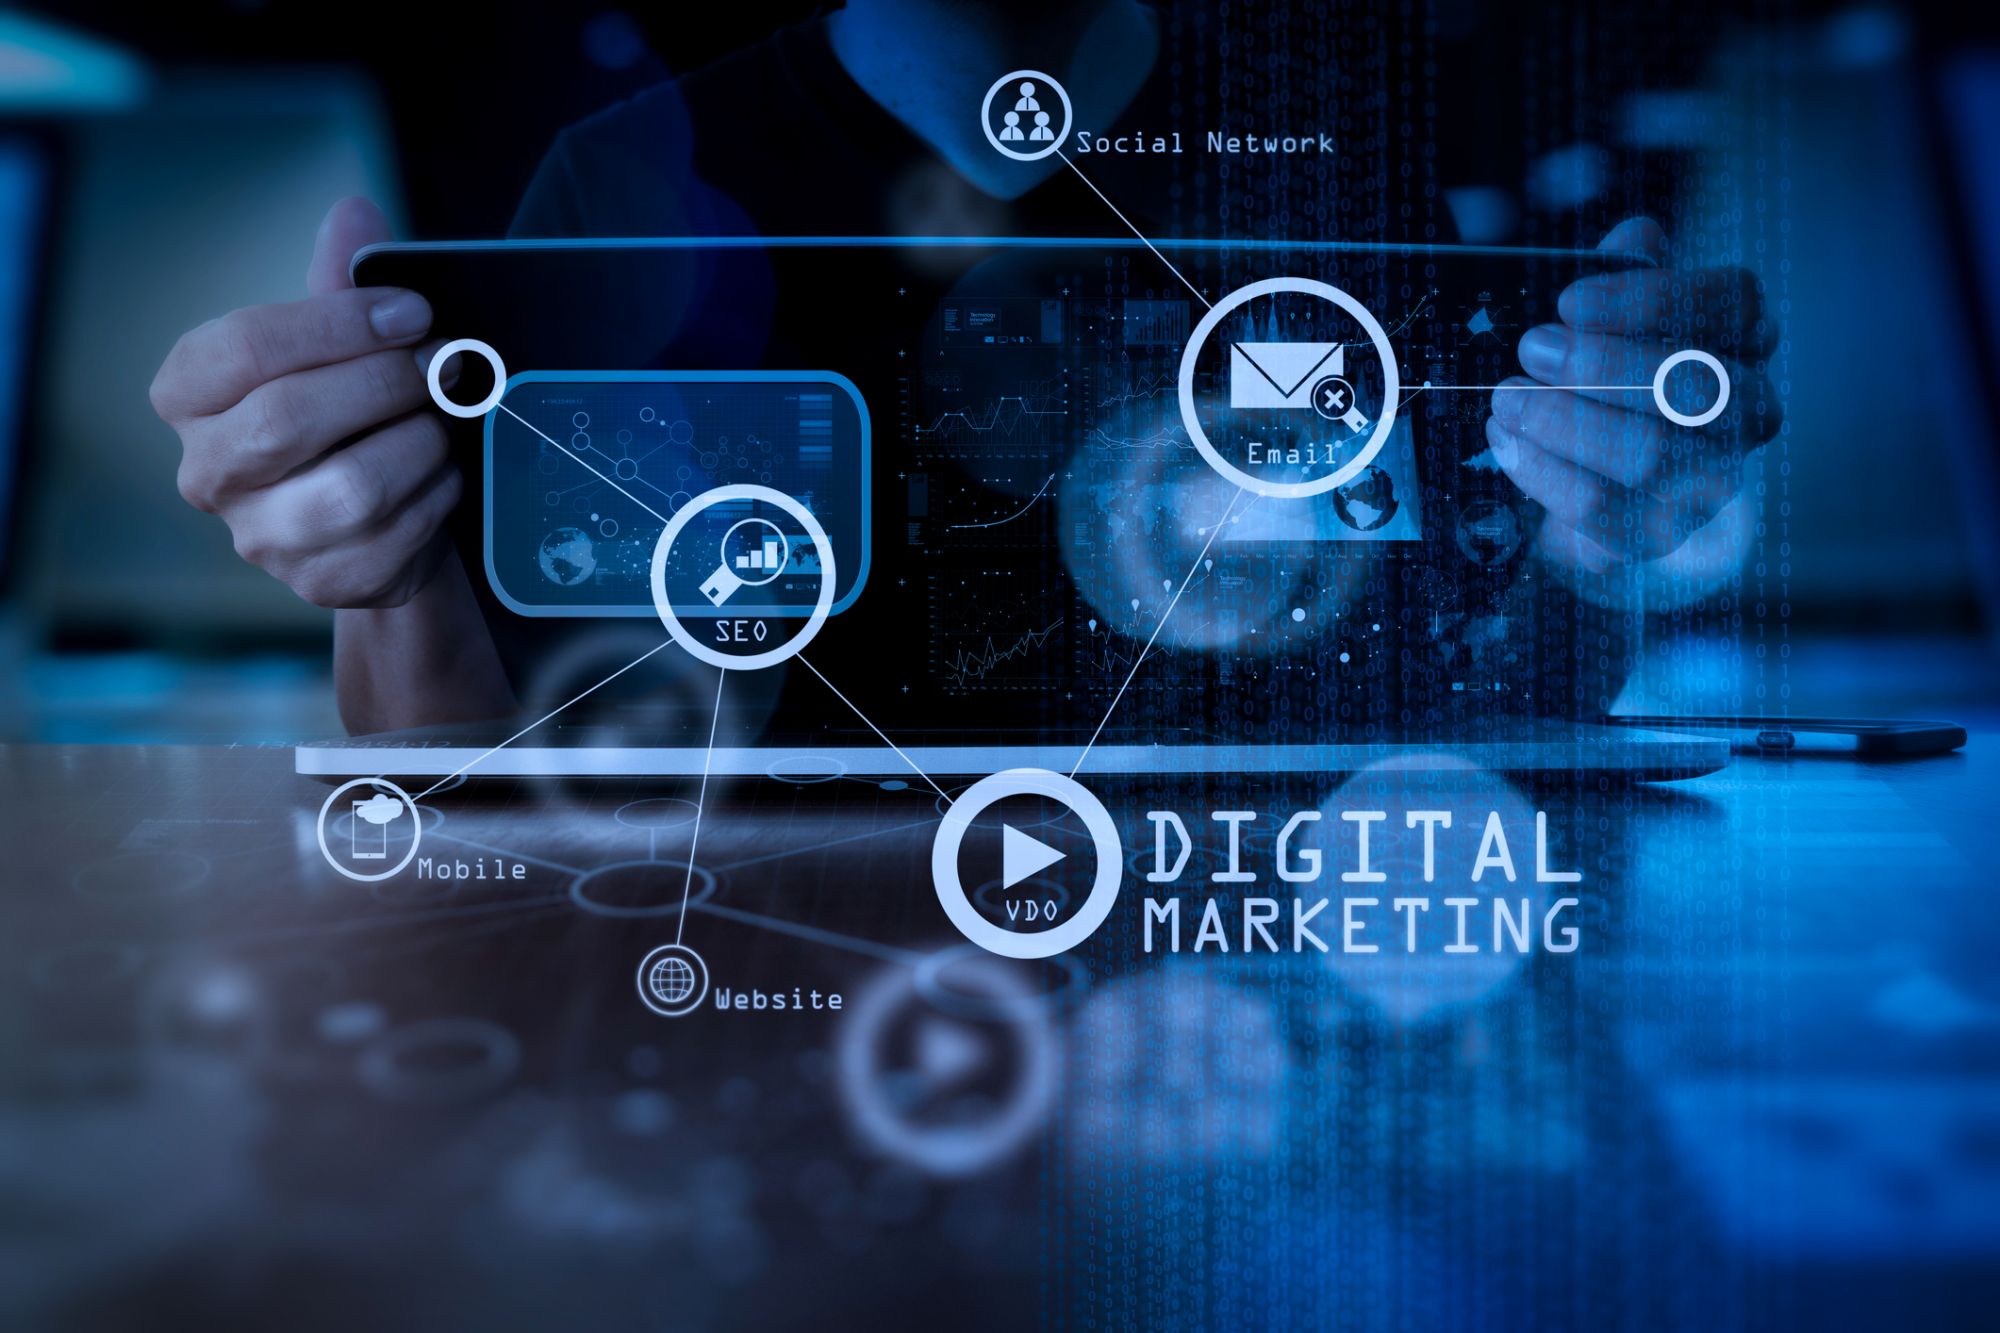 Why Should You Care About Digital Marketing In 2023?